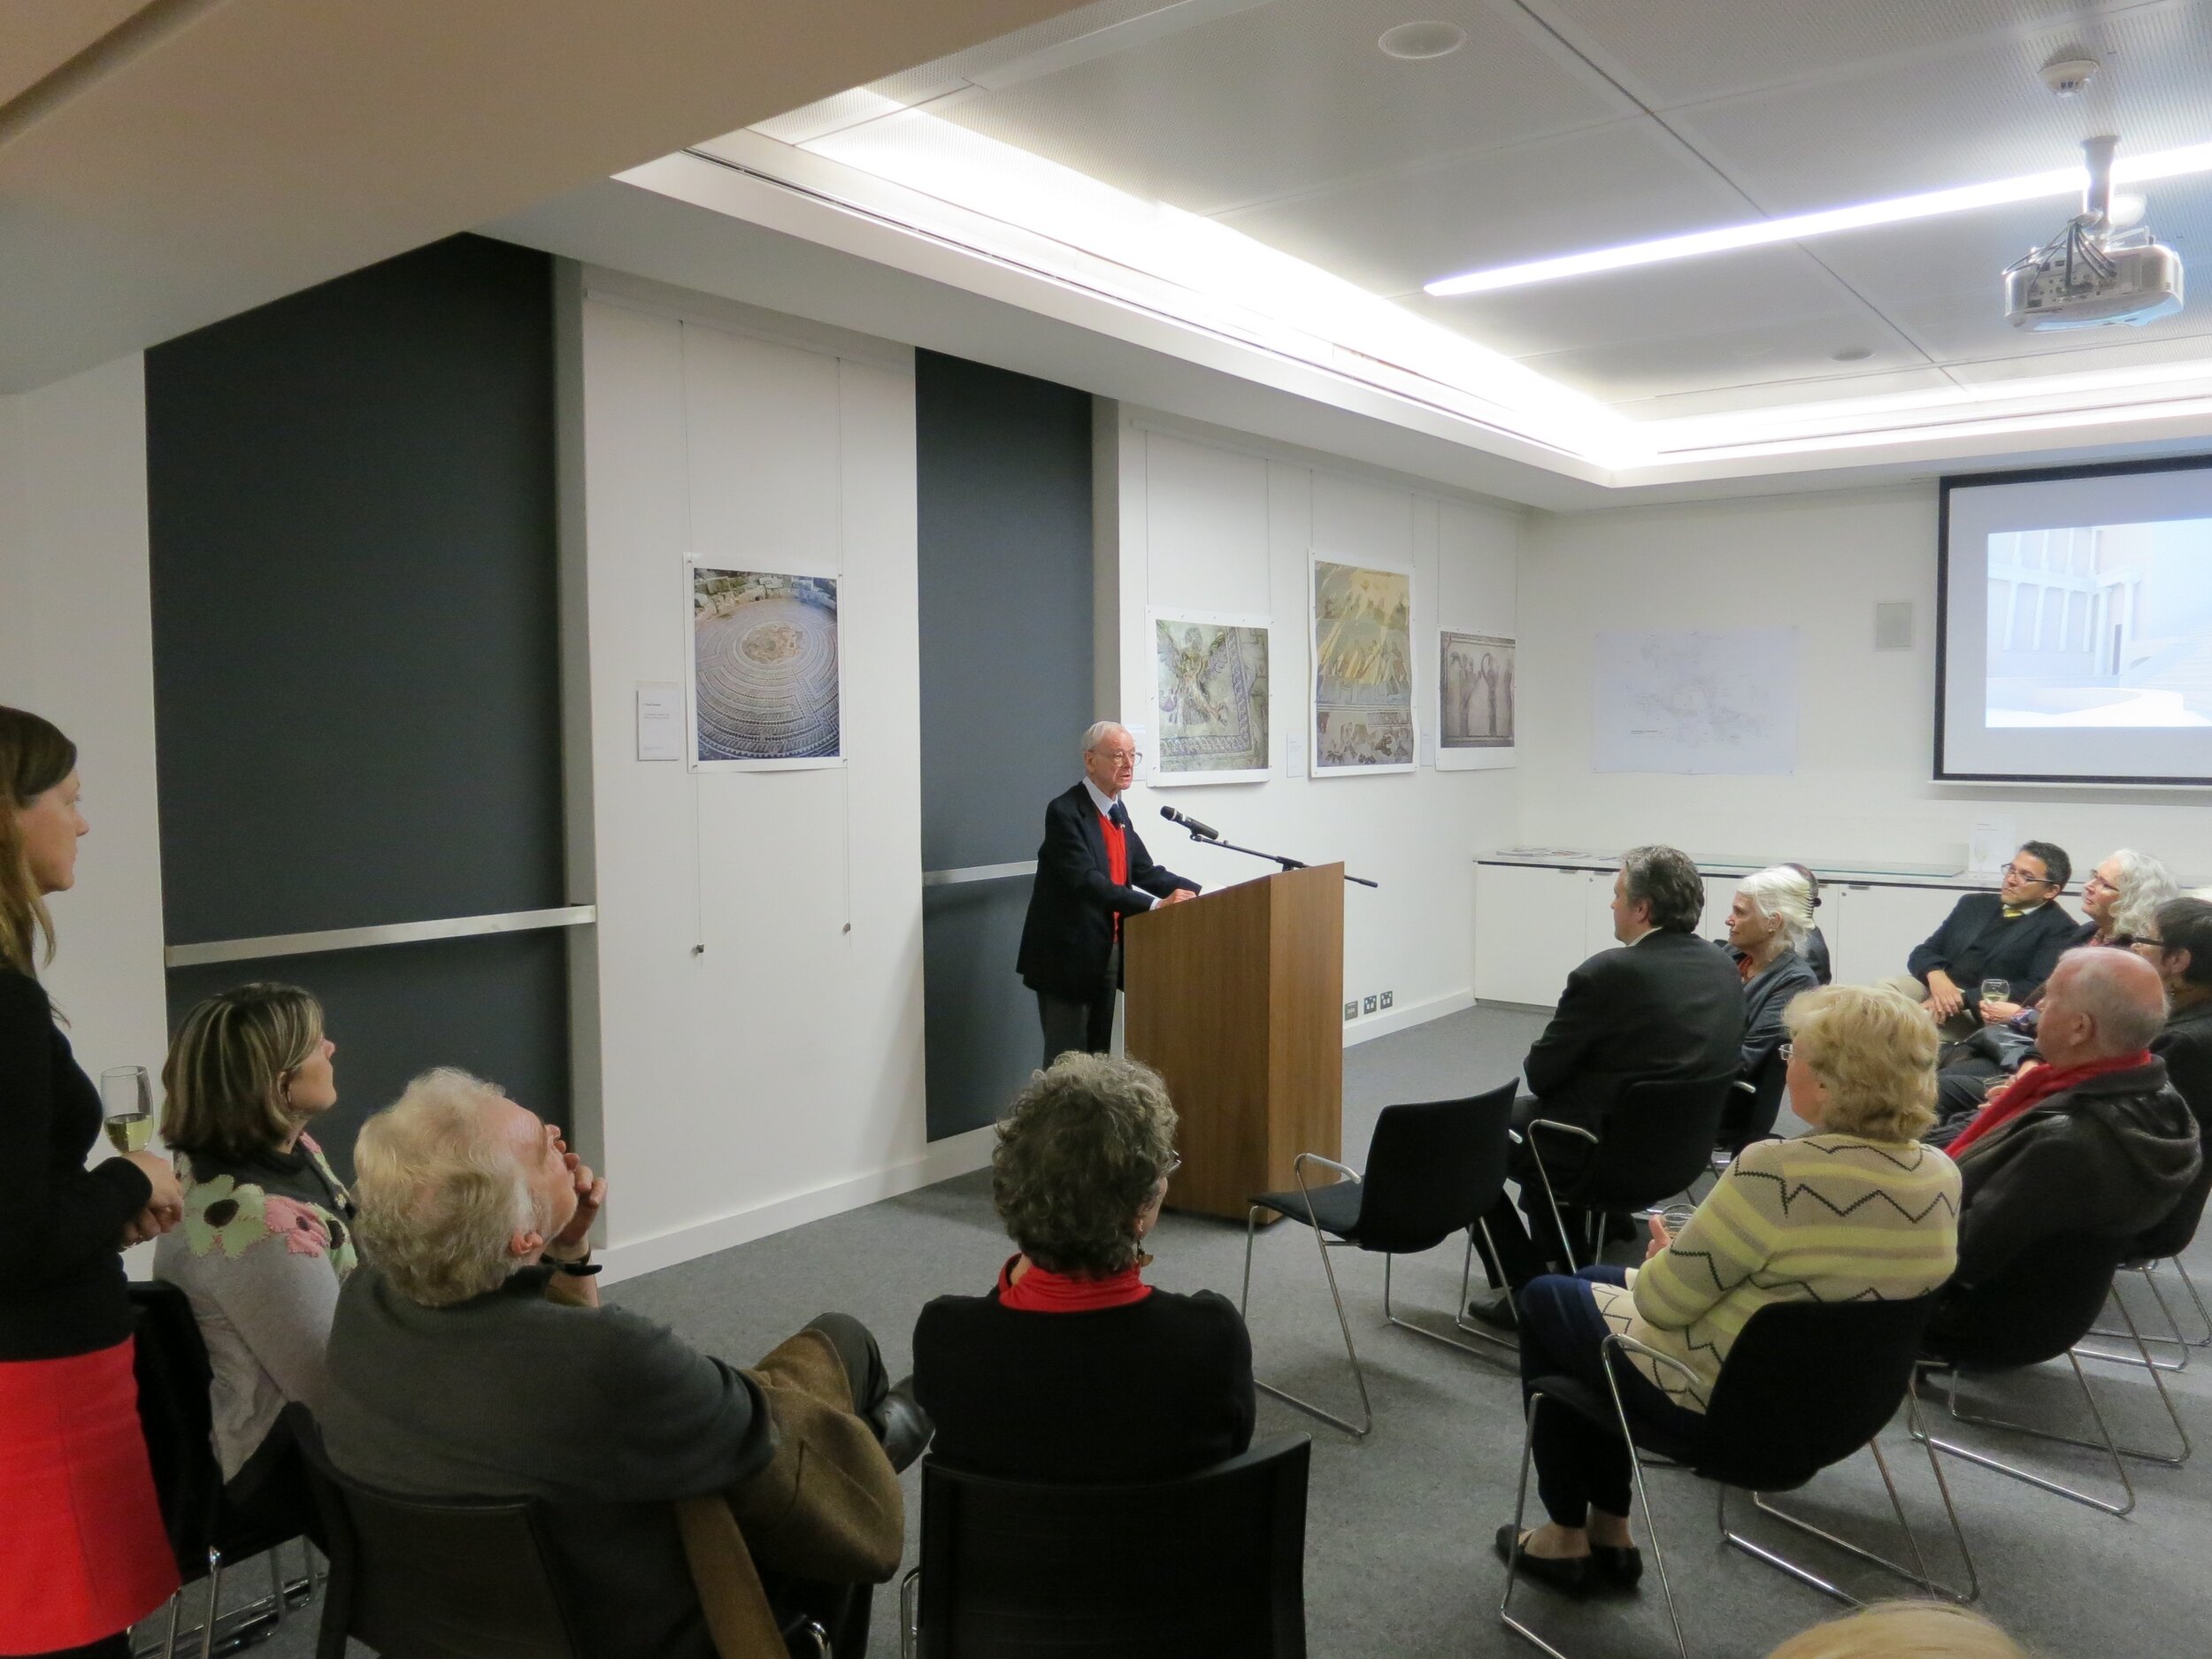  The late Professor Alexander Cambitoglou speaking at the opening of  Response to Cyprus,  10 July 2013, hosted by the Australian Archaeological Institute at Athens (AAIA) at the Centre of Classical and Near Eastern Studies of Australia (CCANESA). Wo